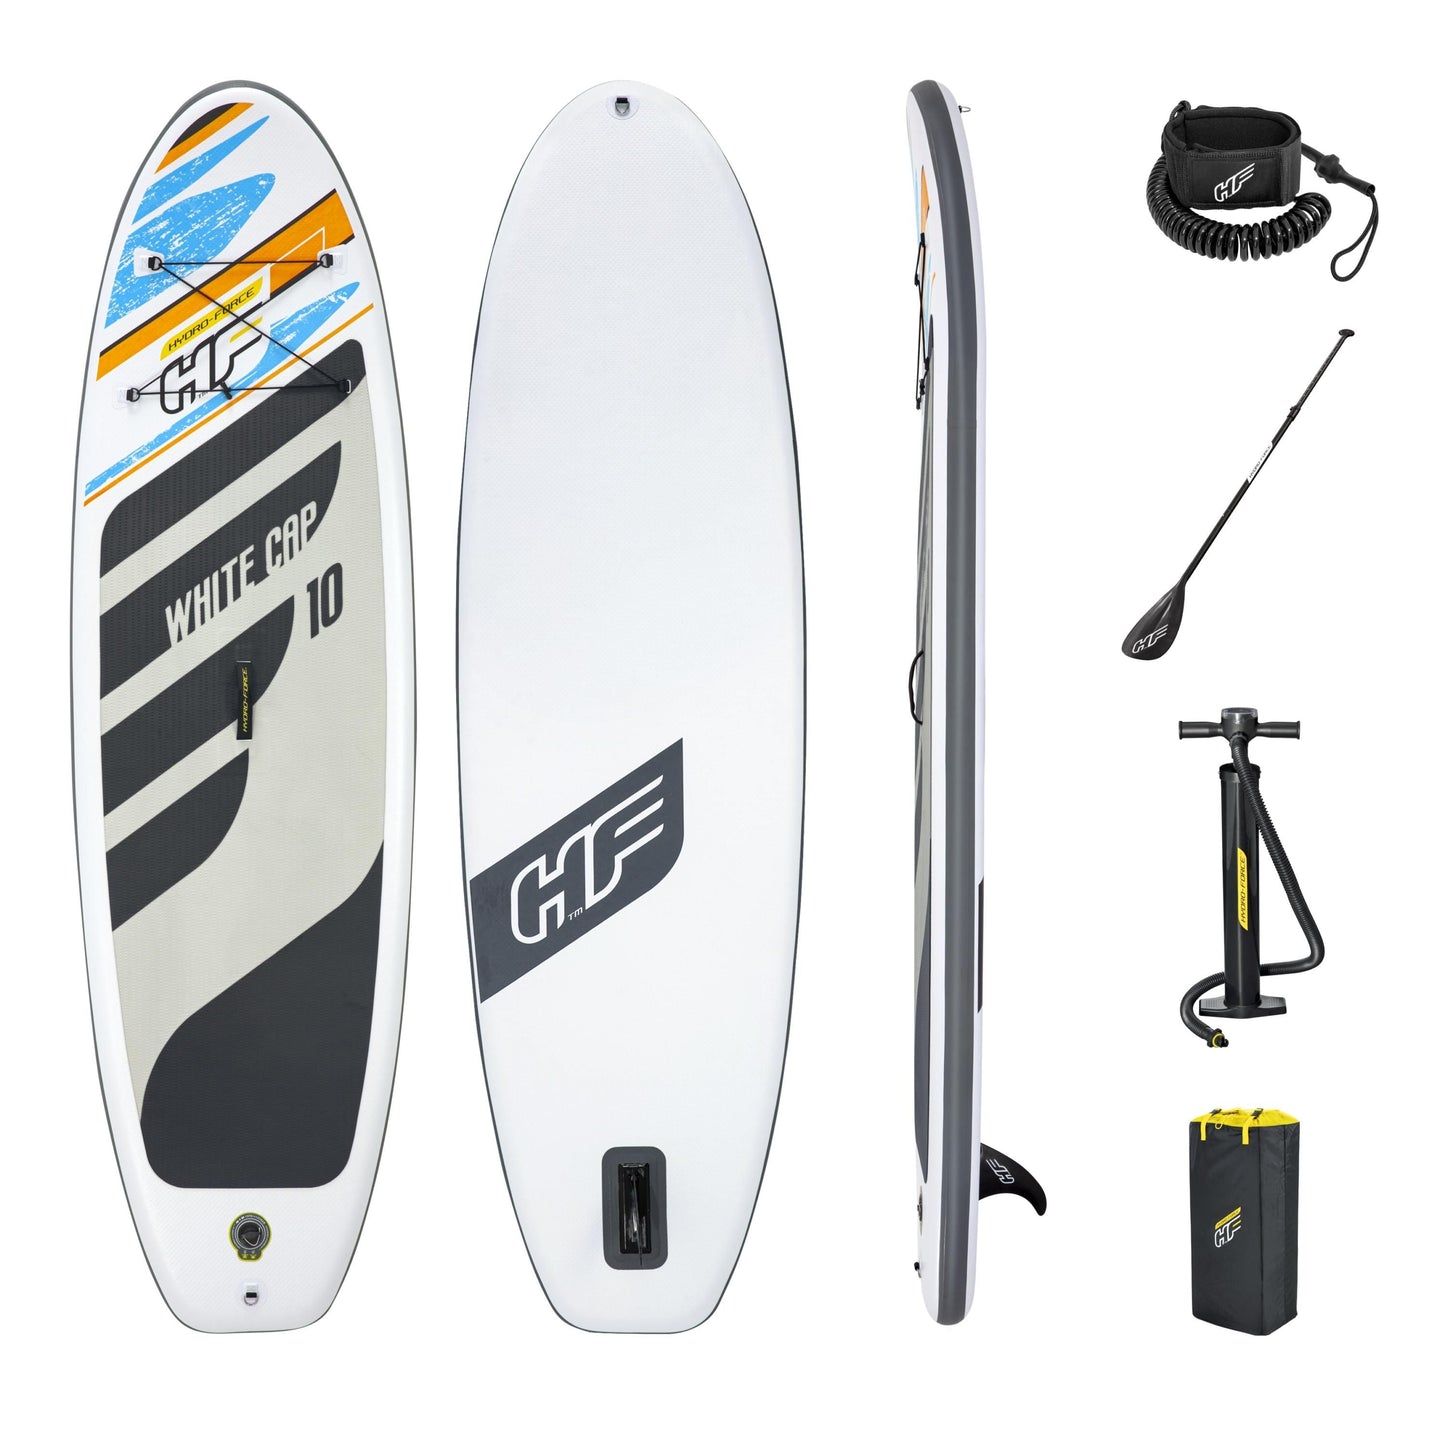 Bestway Hydro-Force White Cap 10ft gonfiabile SUP Stand Up Paddle Board recensione